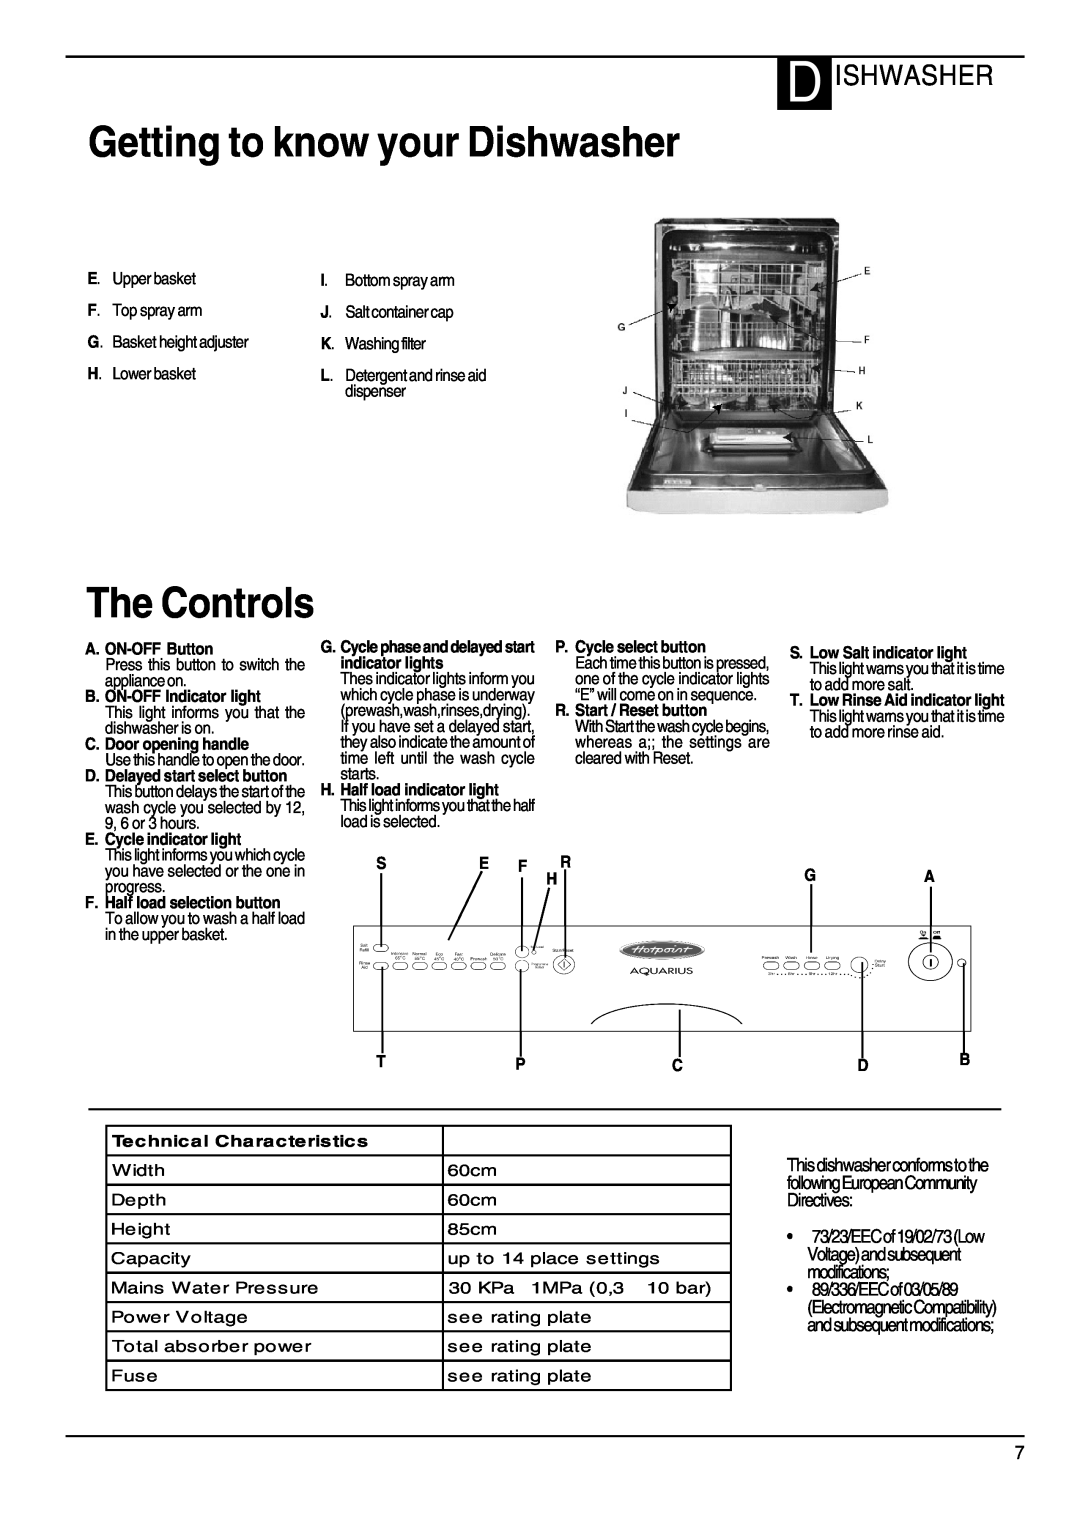 Hotpoint DWM55, DWF50 manual Getting to know your Dishwasher, The Controls, D Ishwasher 